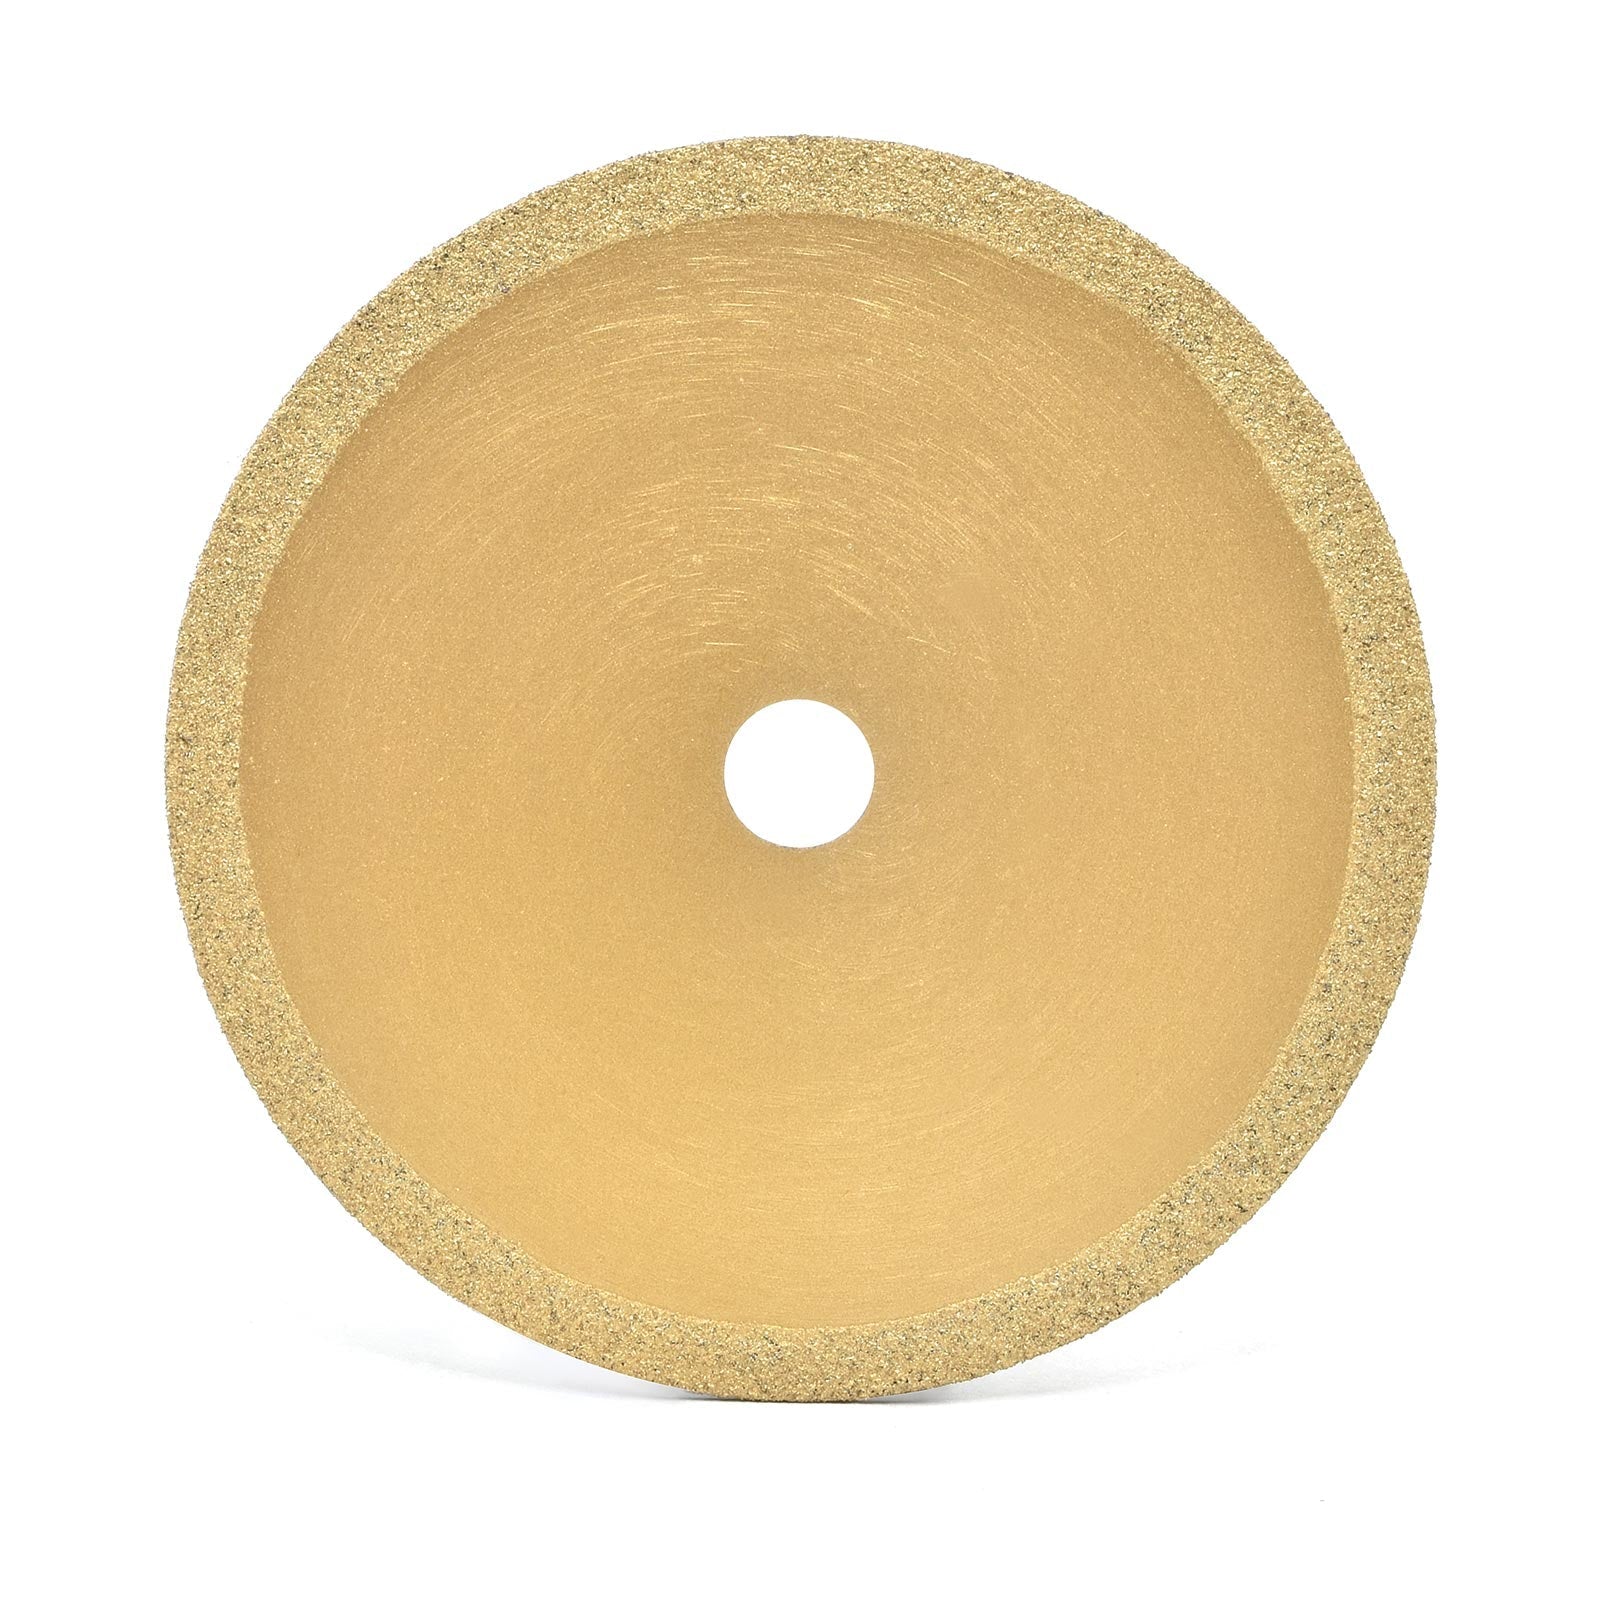 Perma - Grit Tungsten Carbide Abrasive Blade for MicroLux Tilt Arbor Table Saw and Proxxon Chop Saw